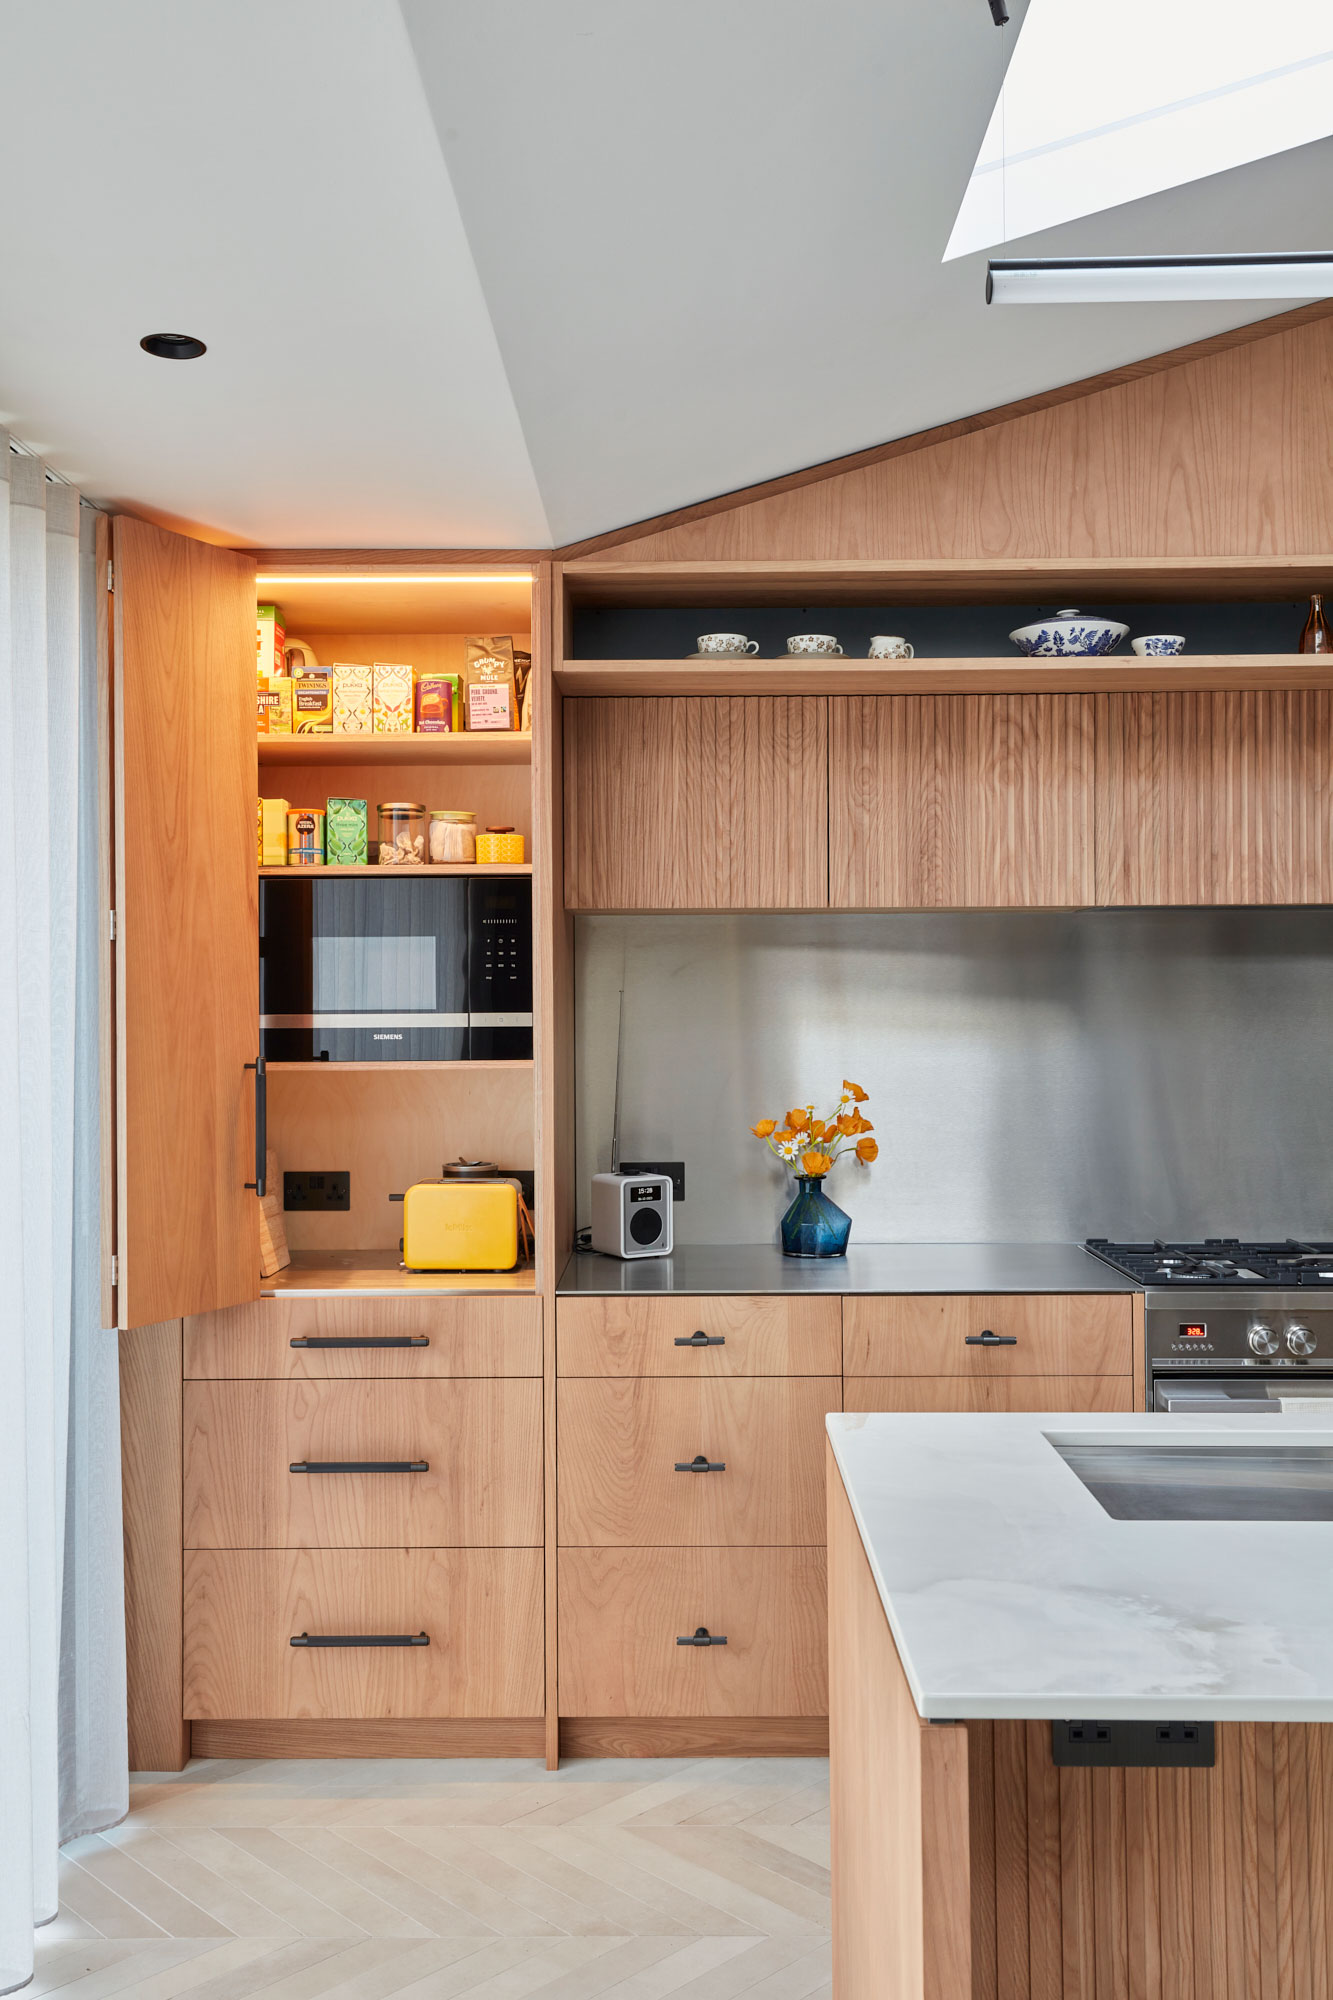 Integrated microwave in tall kitchen cabinet